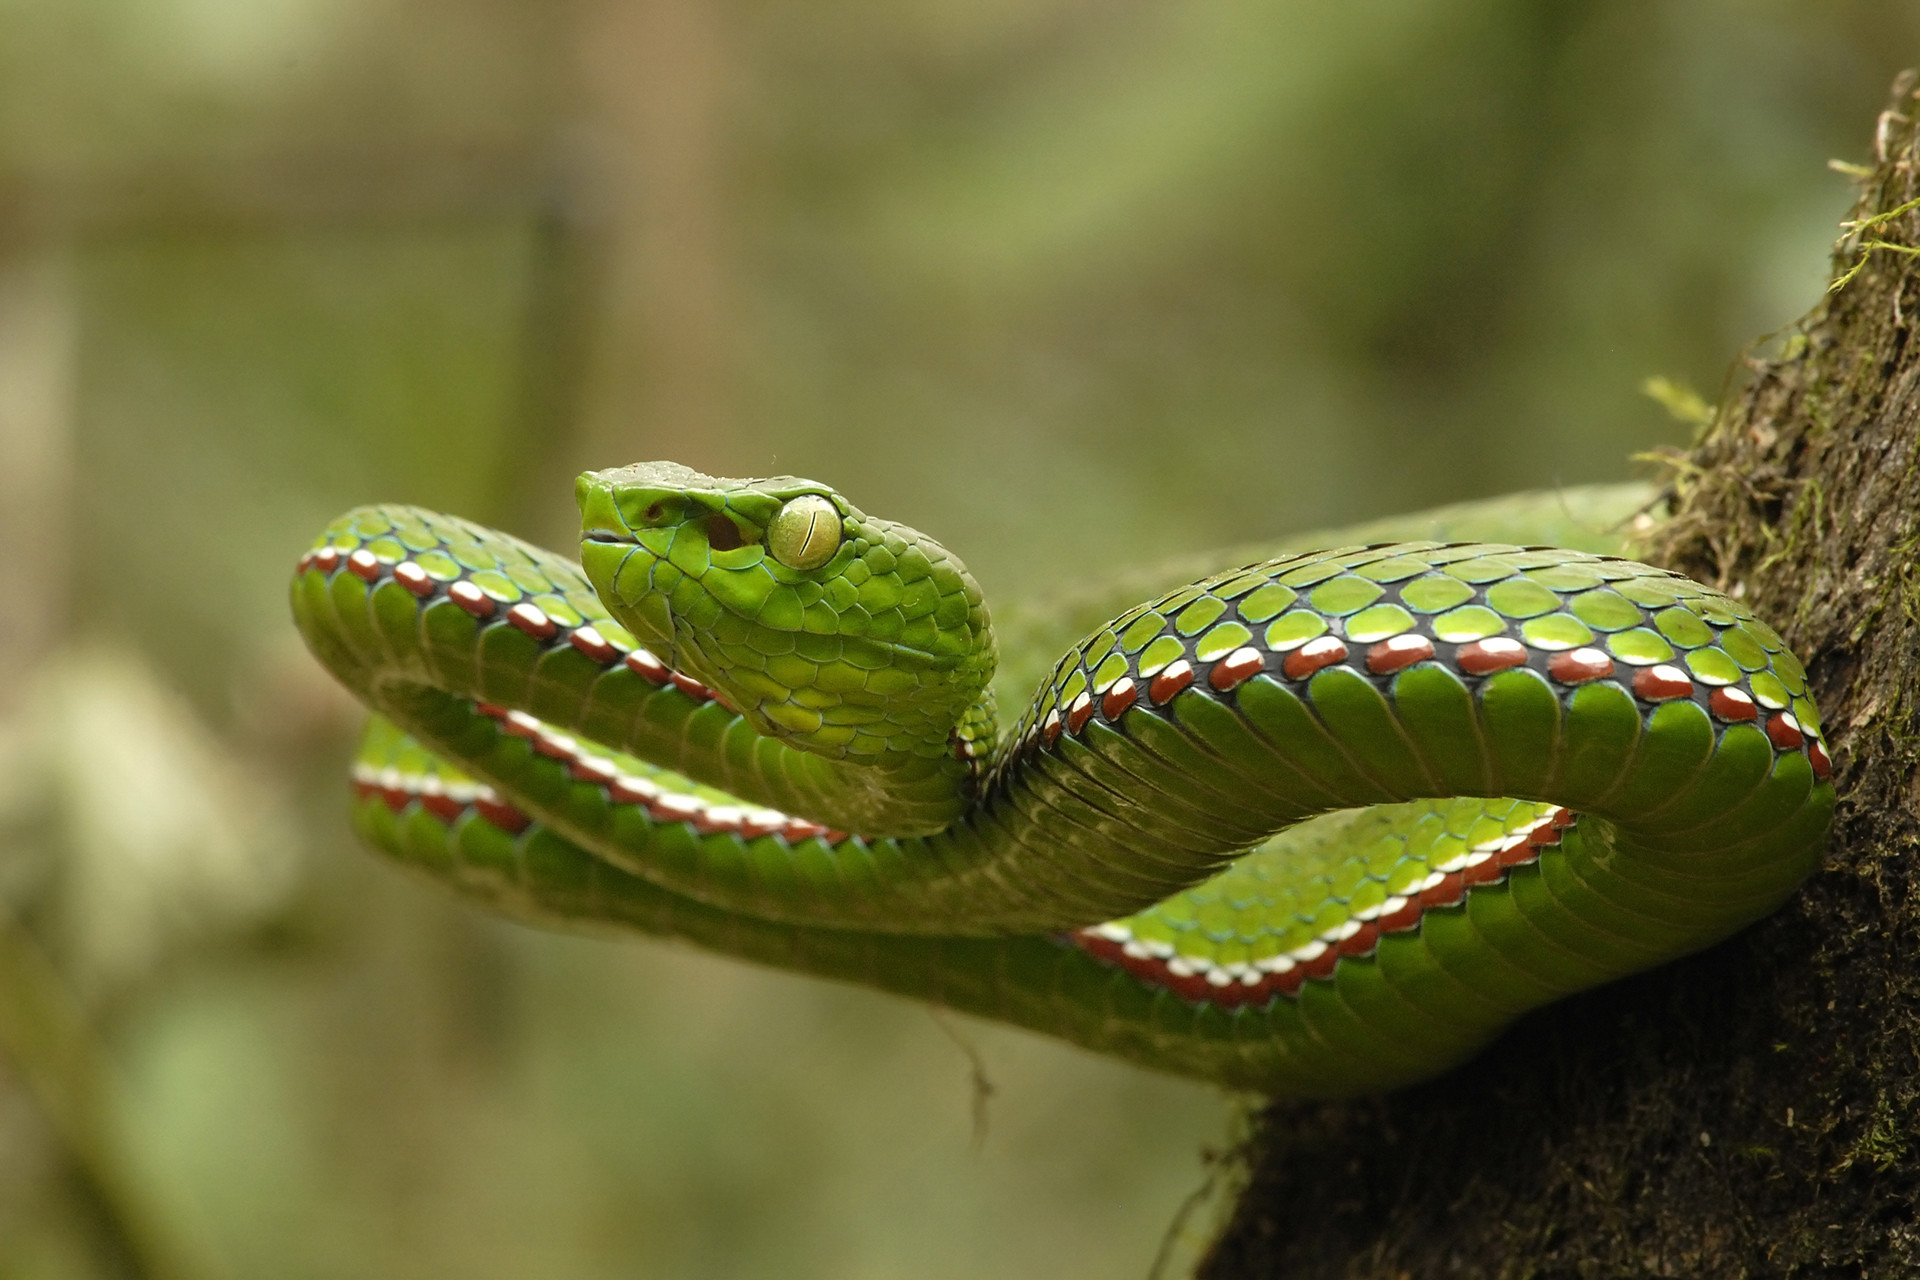 India's Striking Variety Of Pit Vipers | Nature inFocus